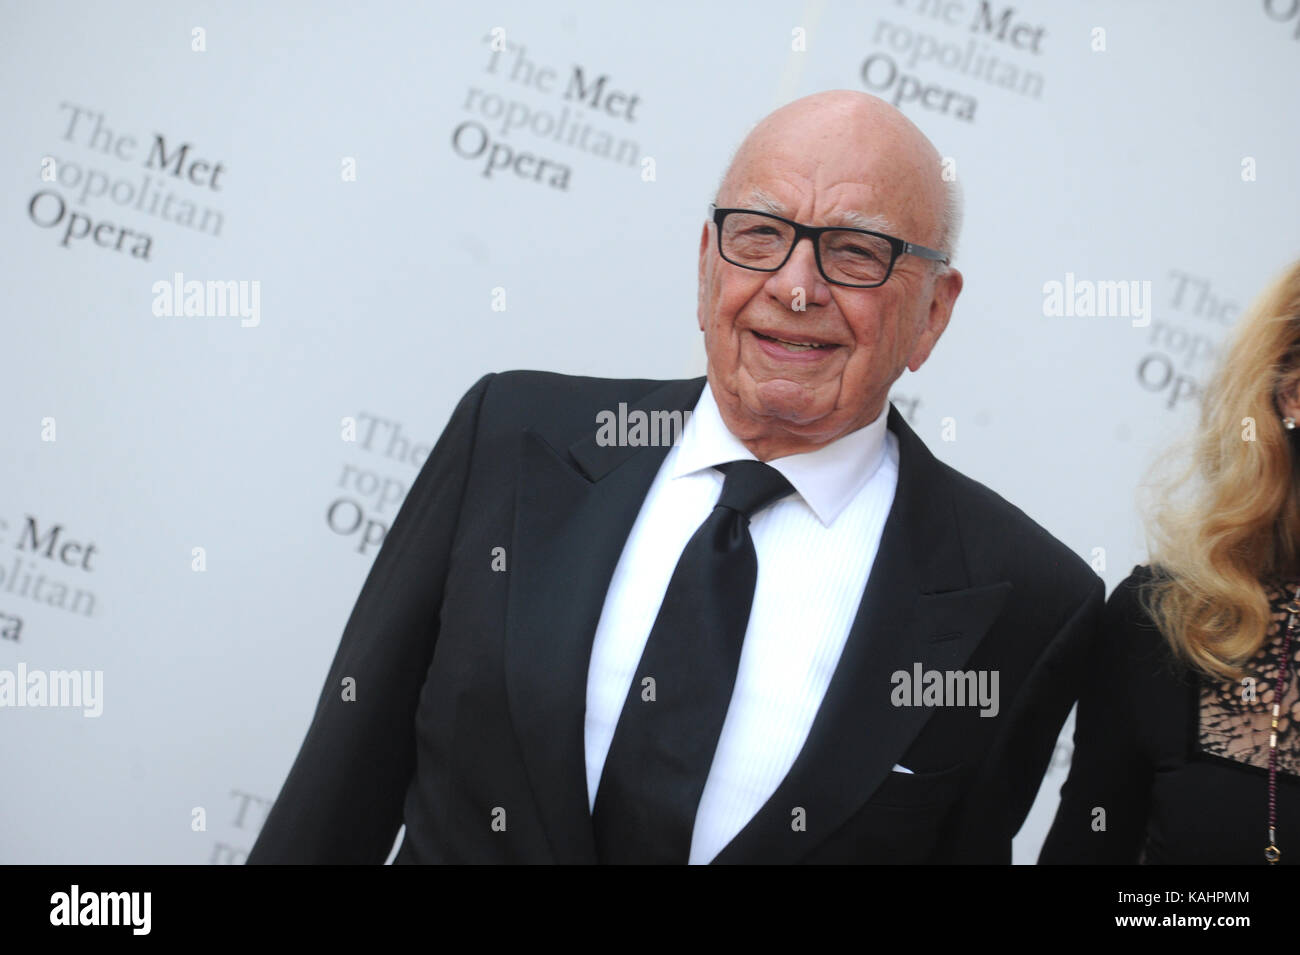 New York, NY, USA. 25th Sep, 2017. Rupert Murdoch, Jerry Hall attends Metropolitan Opera Opening Night Gala at Lincoln Center on September 25, 2017 in New York City. People: Rupert Murdoch, Jerry Hall Transmission Ref: MNC1 Must call if interested Michael Storms Storms Media Group Inc. 305-632-3400 - Cell 305-513-5783 - Fax MikeStorm Credit: Aol.Com Www.Storms Media Group.Com/Alamy Live News Stock Photo